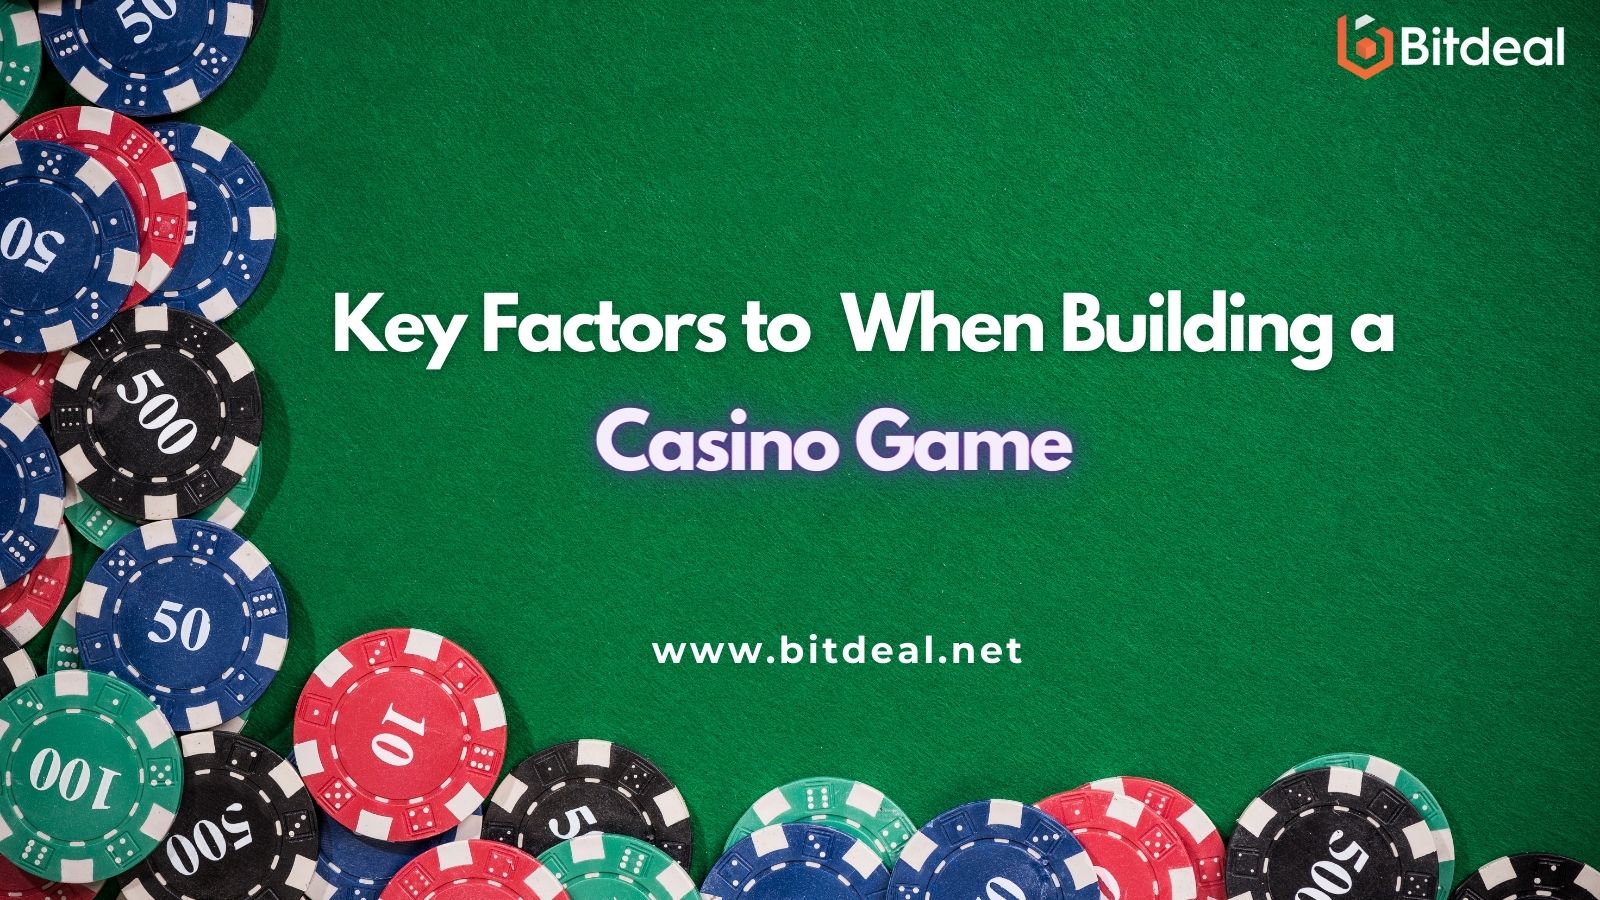 Key Factors to Consider When Building a Casino Game